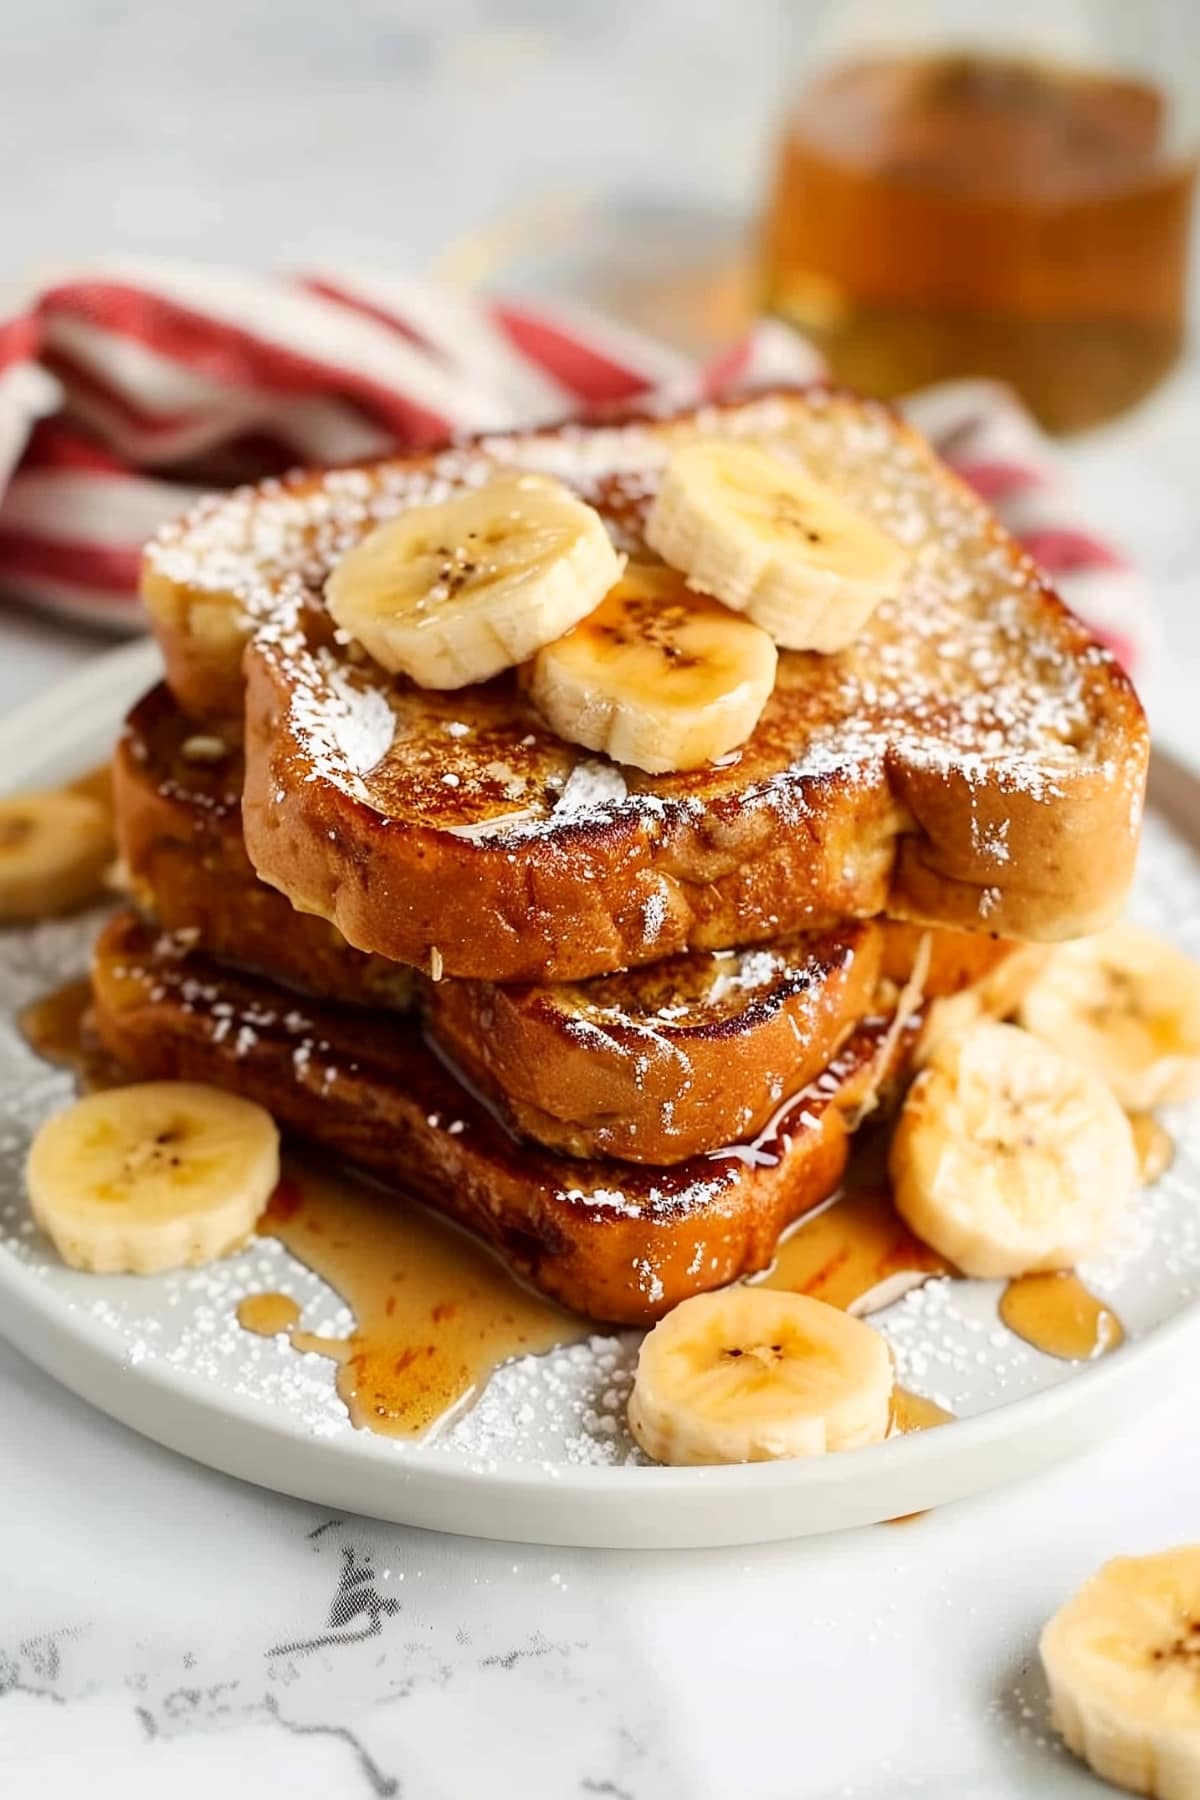 Homemade banana french toast with maple syrup and powdered sugar